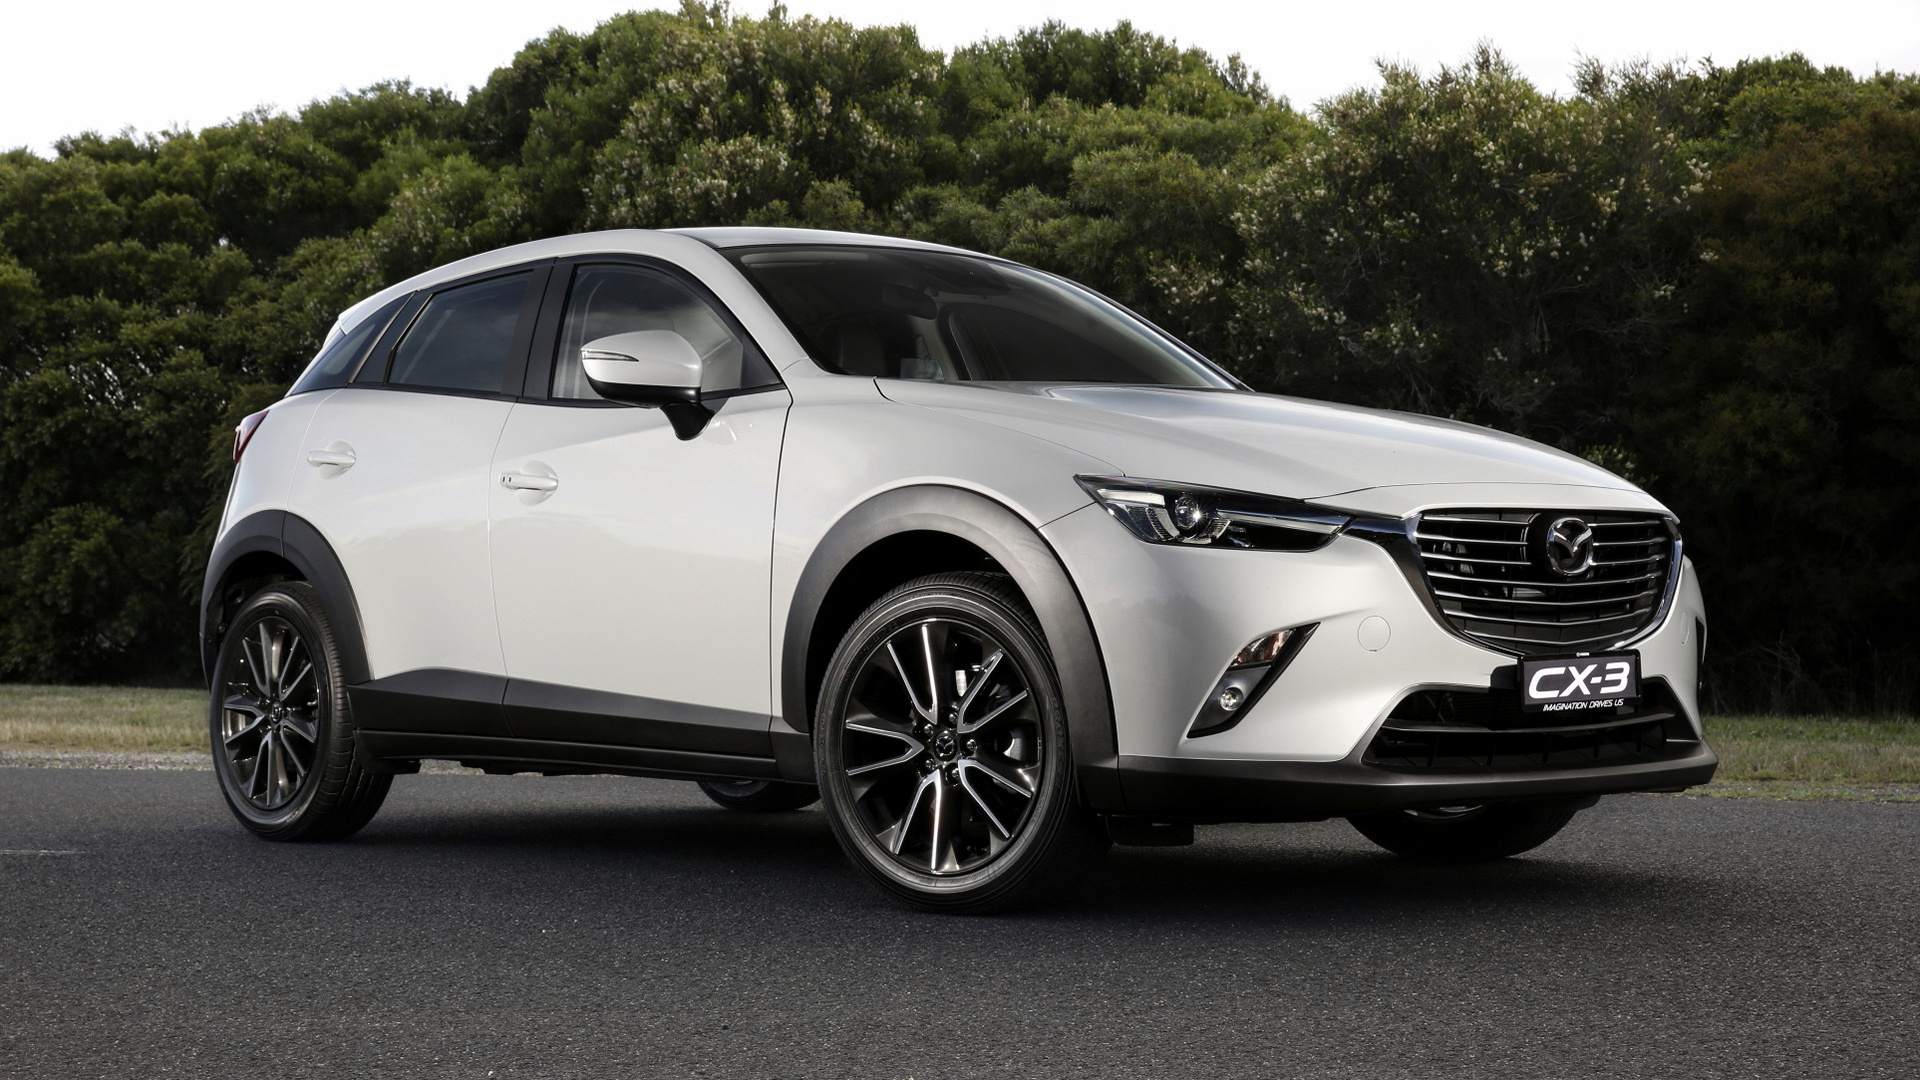 2015 Mazda CX-3 (AU) - Wallpapers and HD Images | Car Pixel